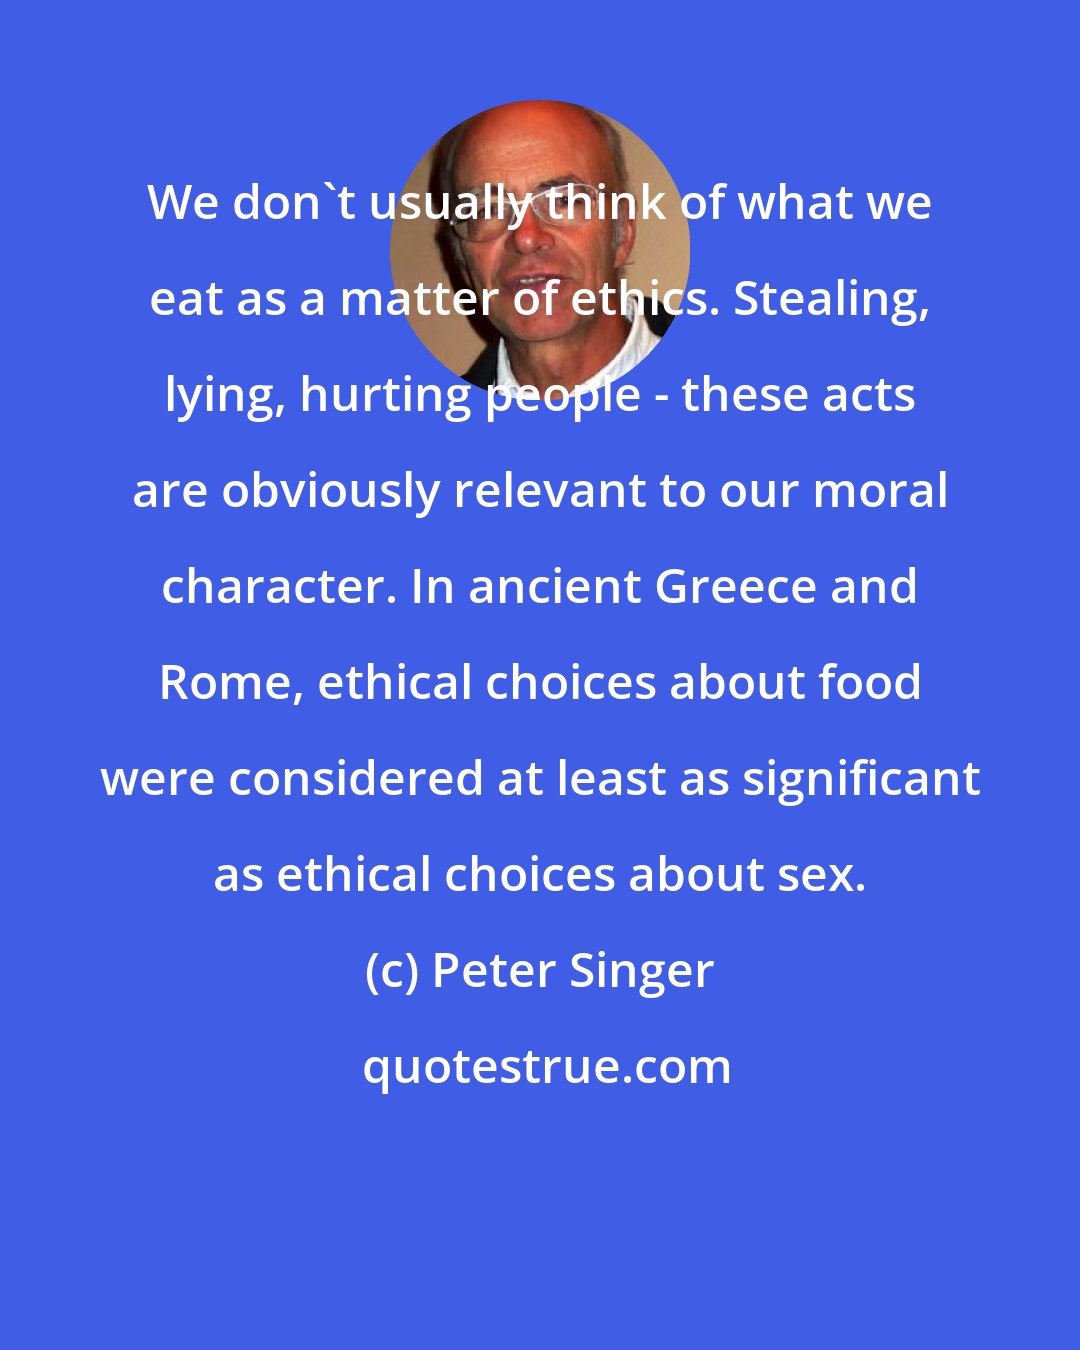 Peter Singer: We don't usually think of what we eat as a matter of ethics. Stealing, lying, hurting people - these acts are obviously relevant to our moral character. In ancient Greece and Rome, ethical choices about food were considered at least as significant as ethical choices about sex.